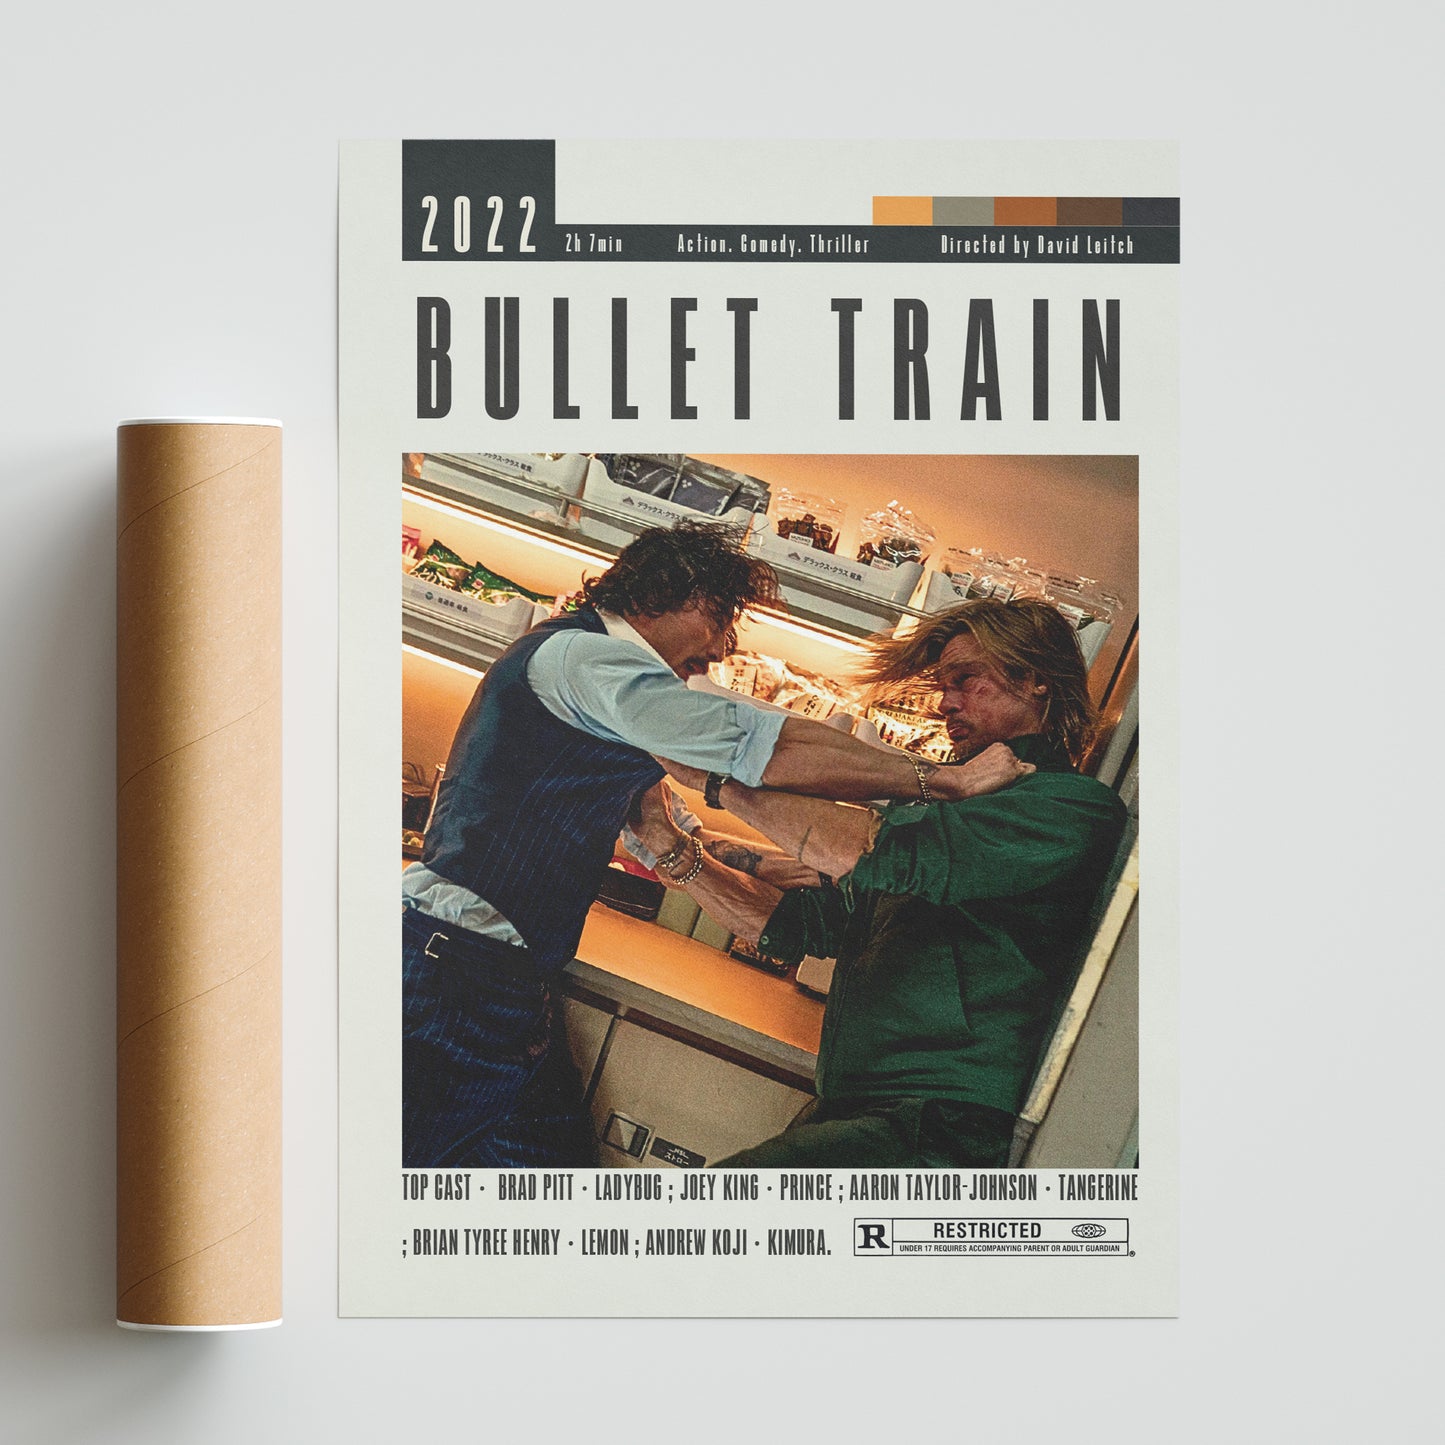 Discover the best movies of all time with our Bullet Train Poster featuring iconic minimalistic designs of 98 types of movie posters. Available in sizes from A6 to A3, this custom wall art print will elevate your decor with vintage retro vibes. Each poster includes top cast, duration, director, and iconic scenes.